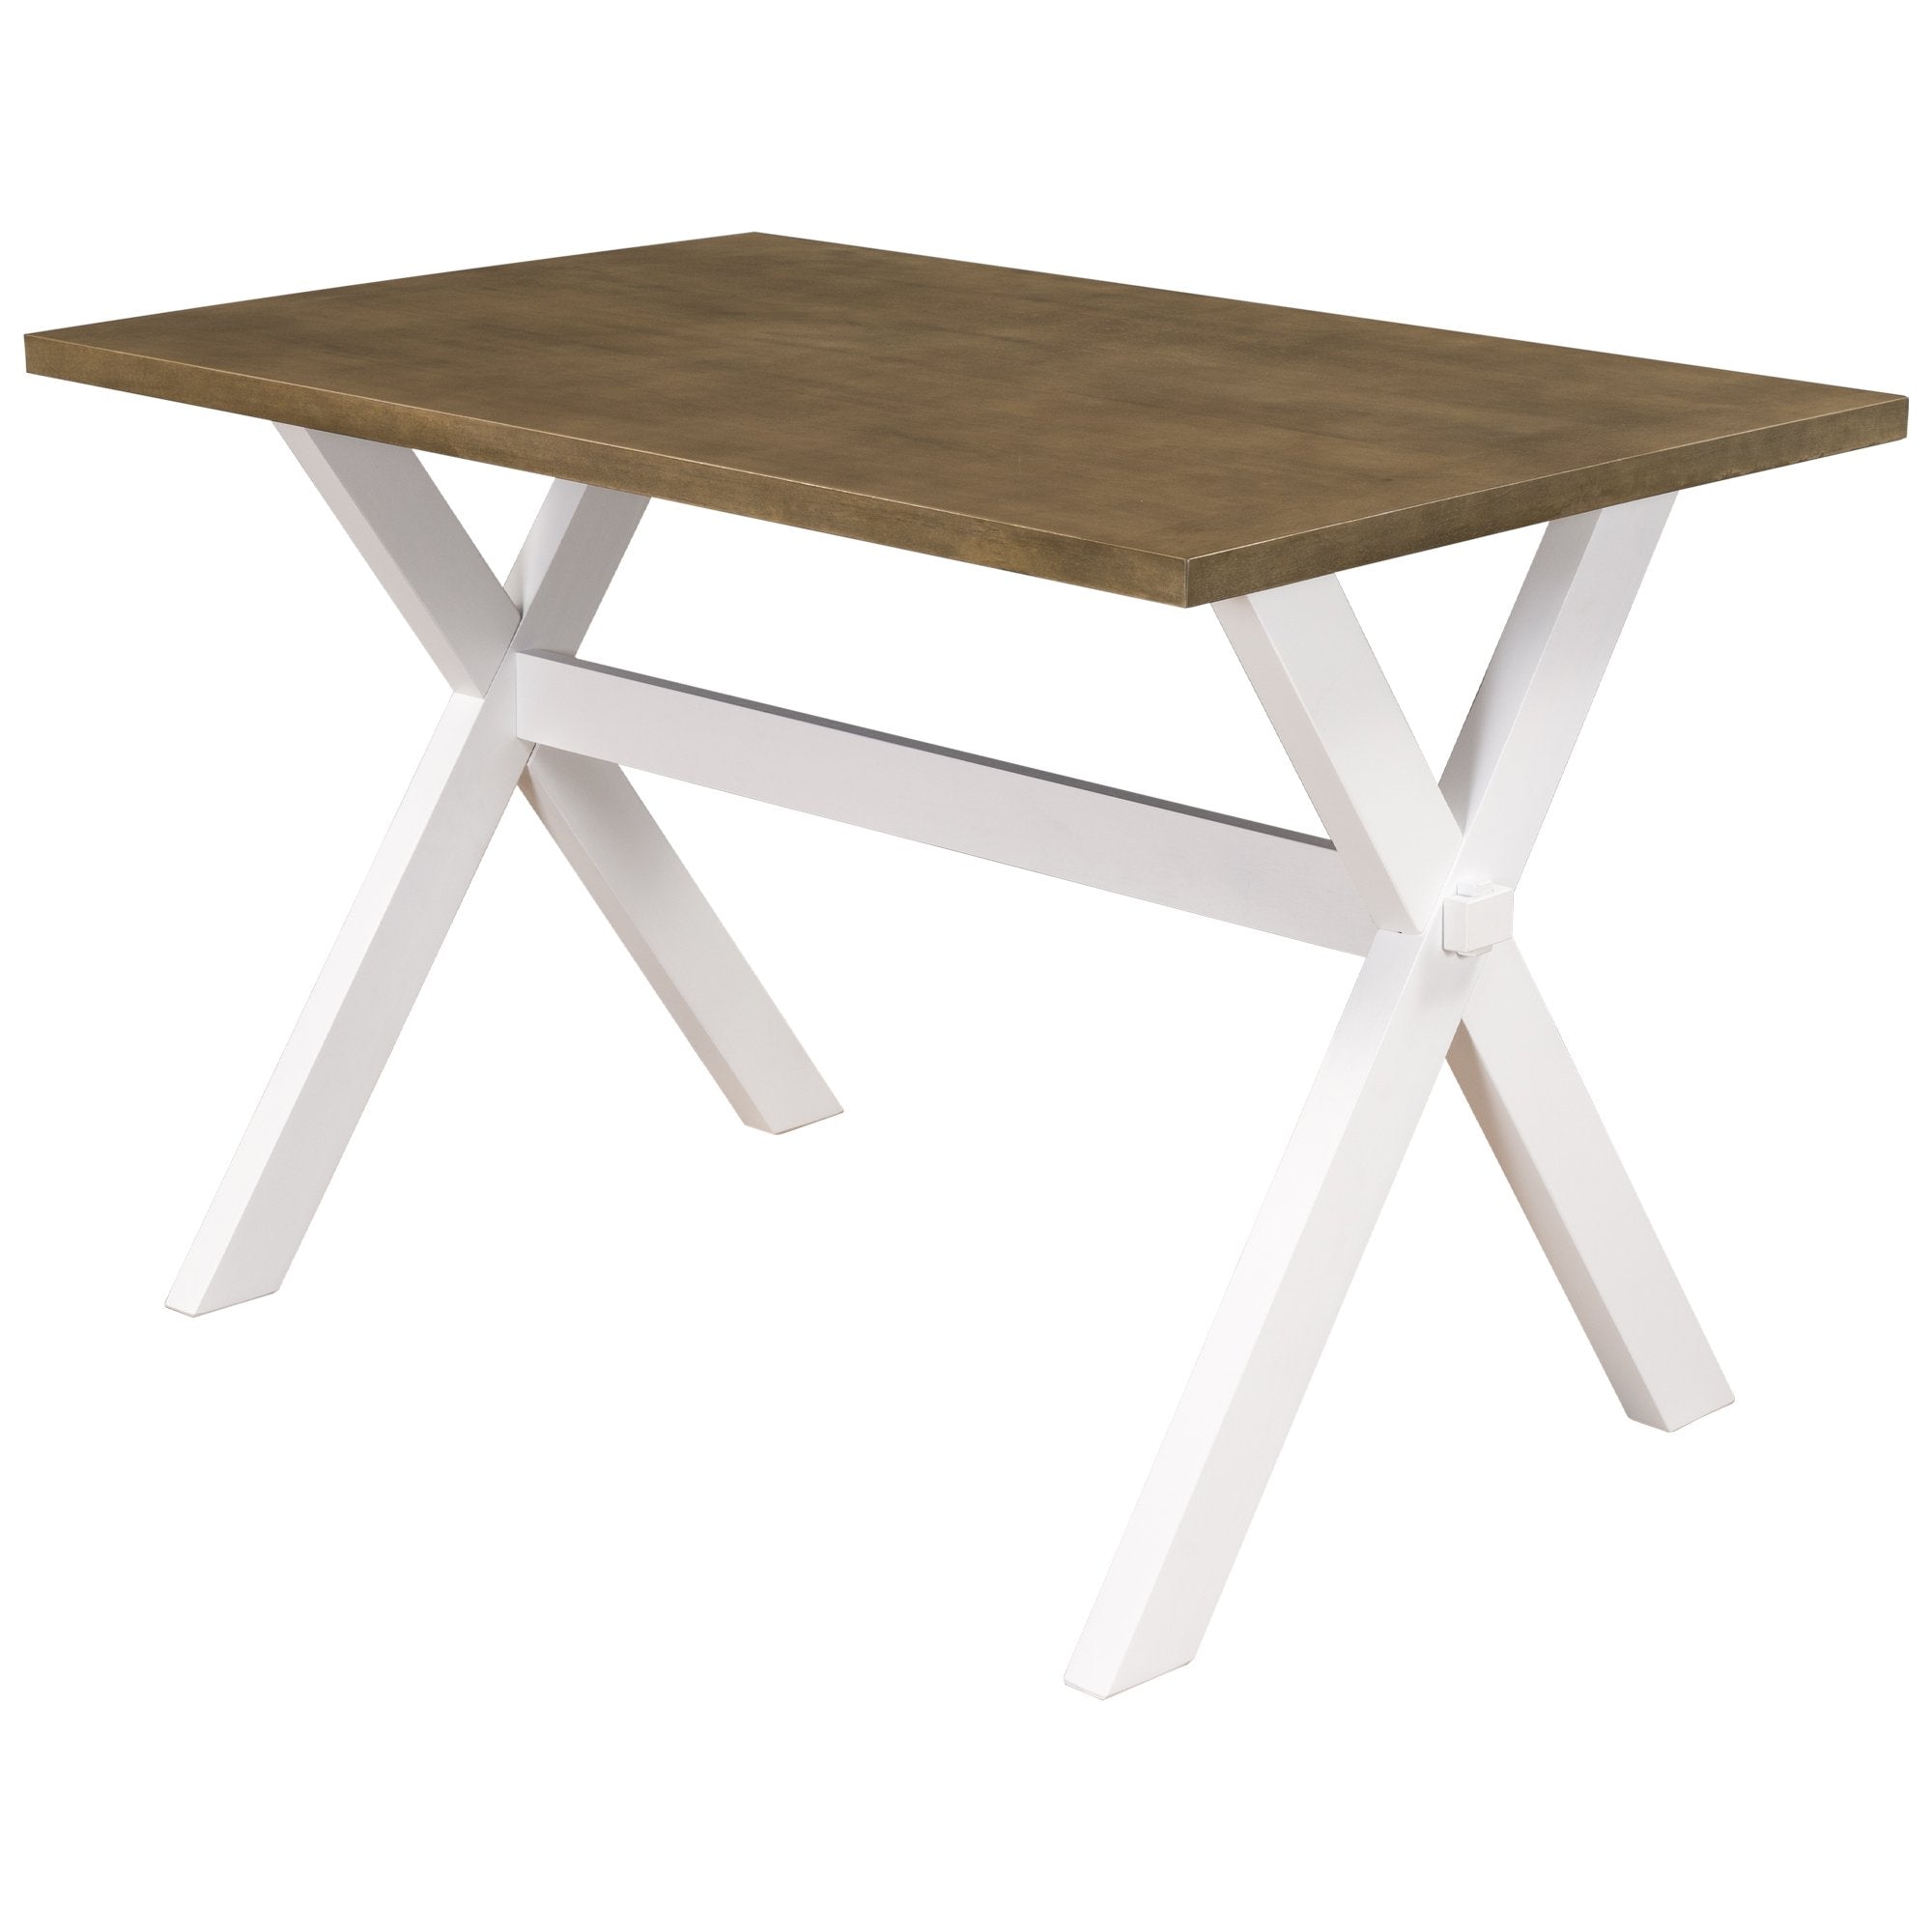 Farmhouse Rustic Wood Kitchen Dining Table with X-shape Legs, Brown+White-Boyel Living